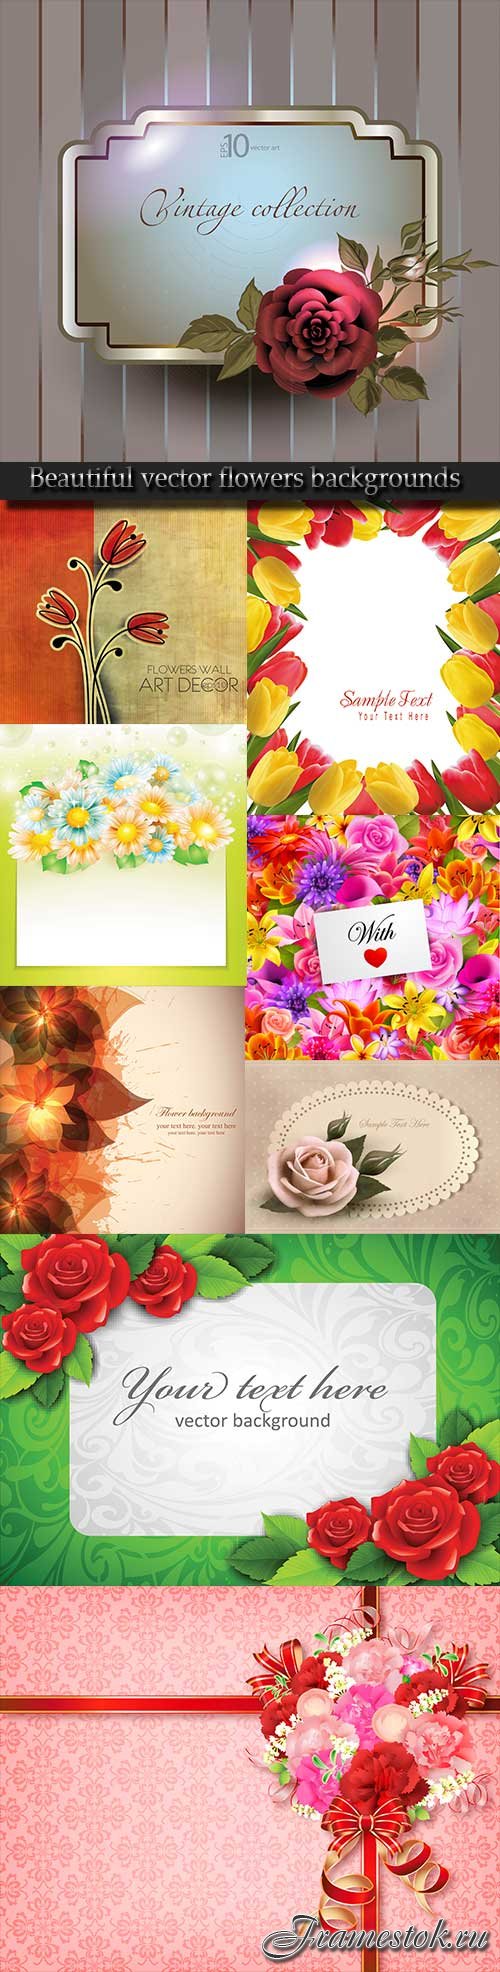 Beautiful vector flowers backgrounds